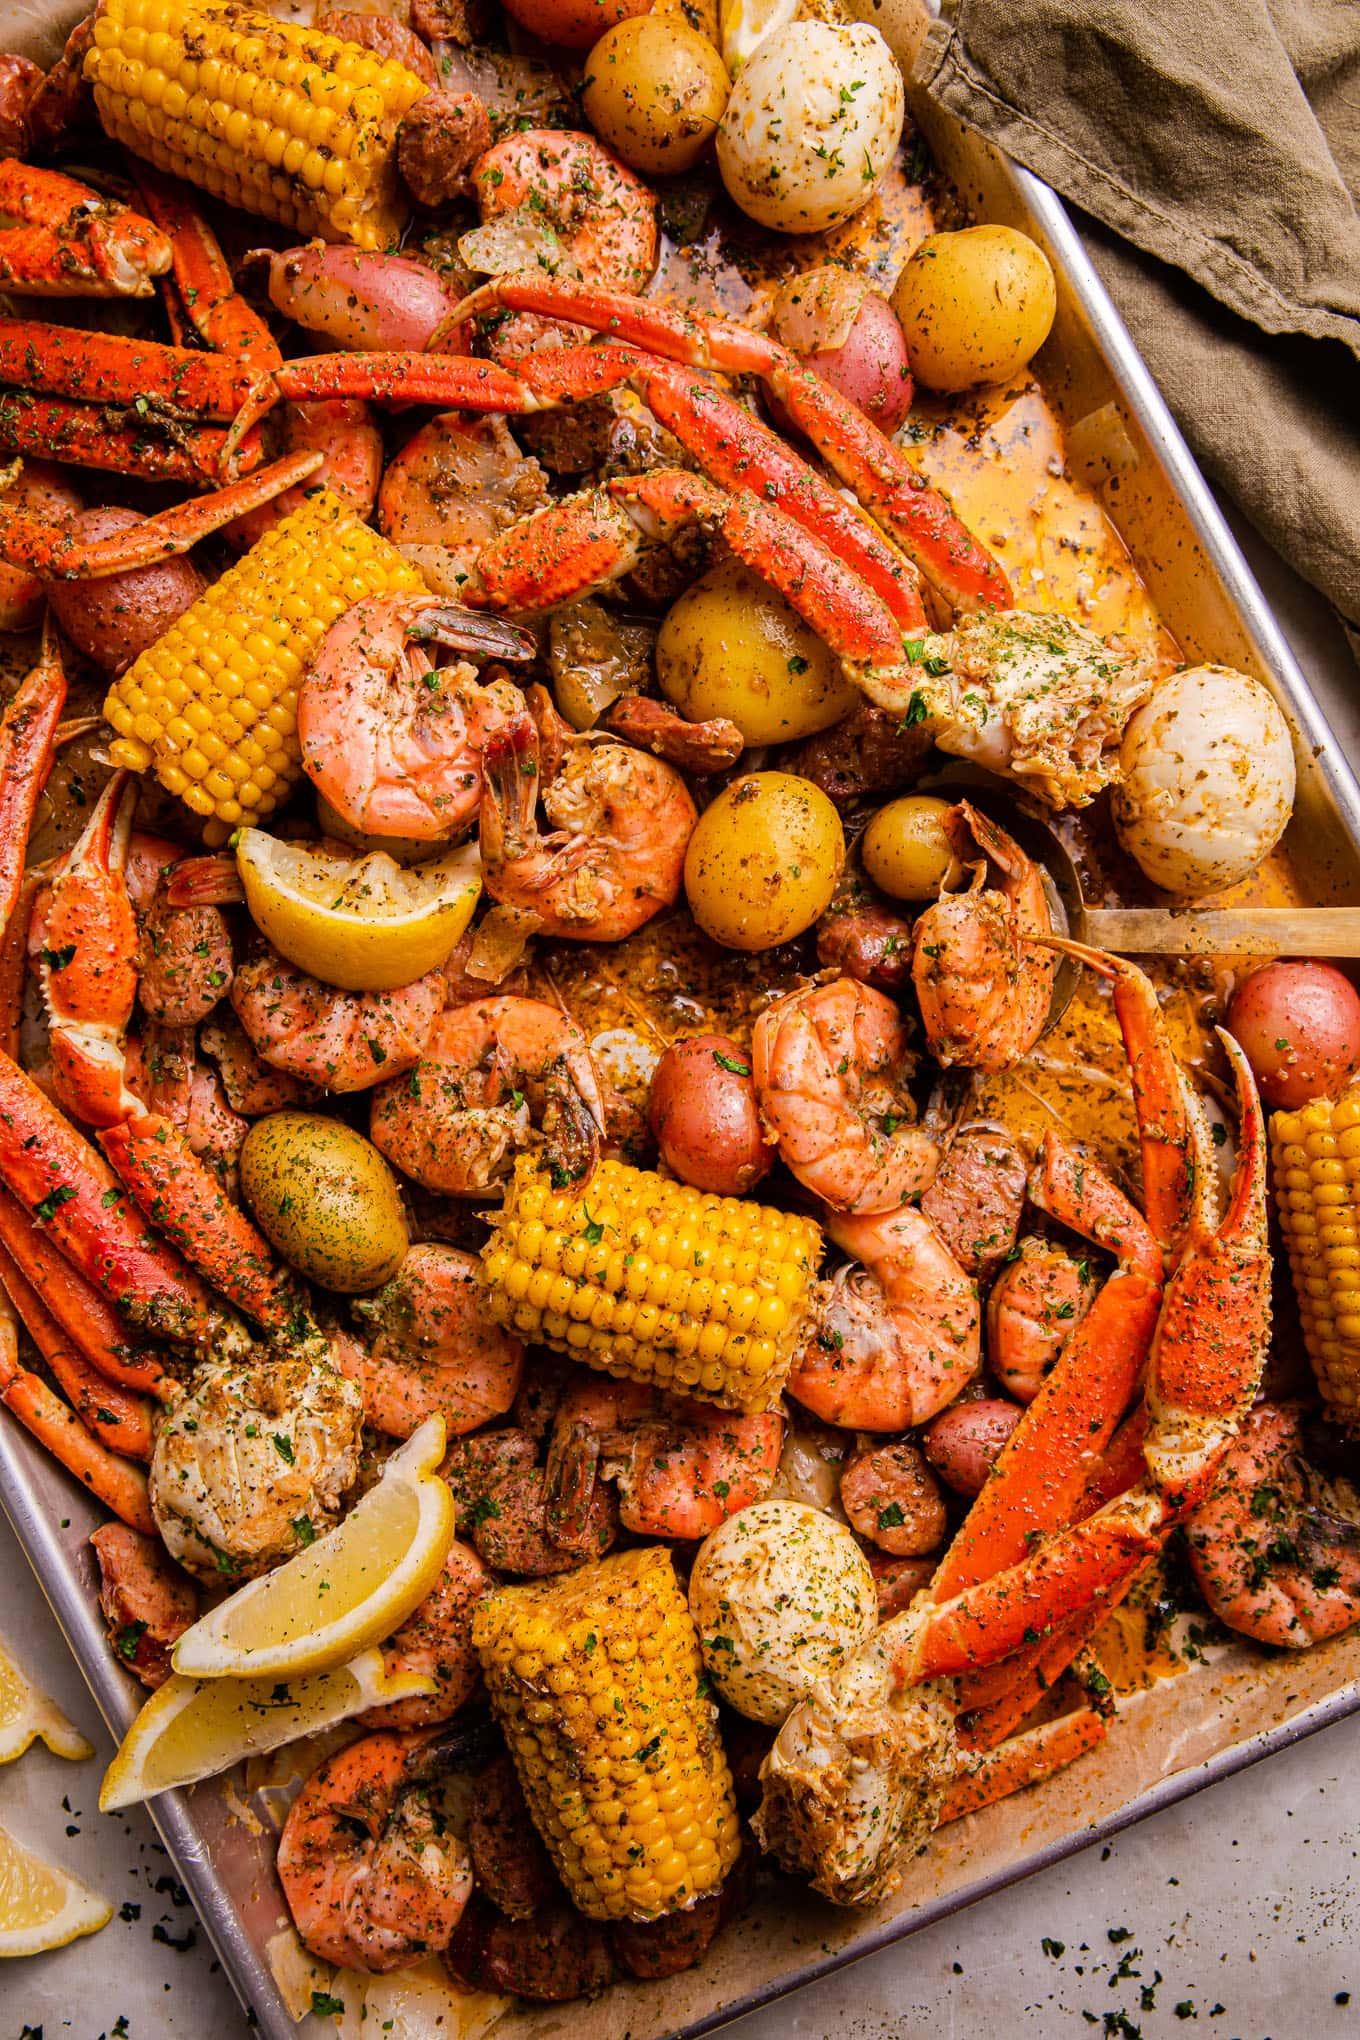 “From Tide to Table: Fresh Seafood Recipes for Every Palate”